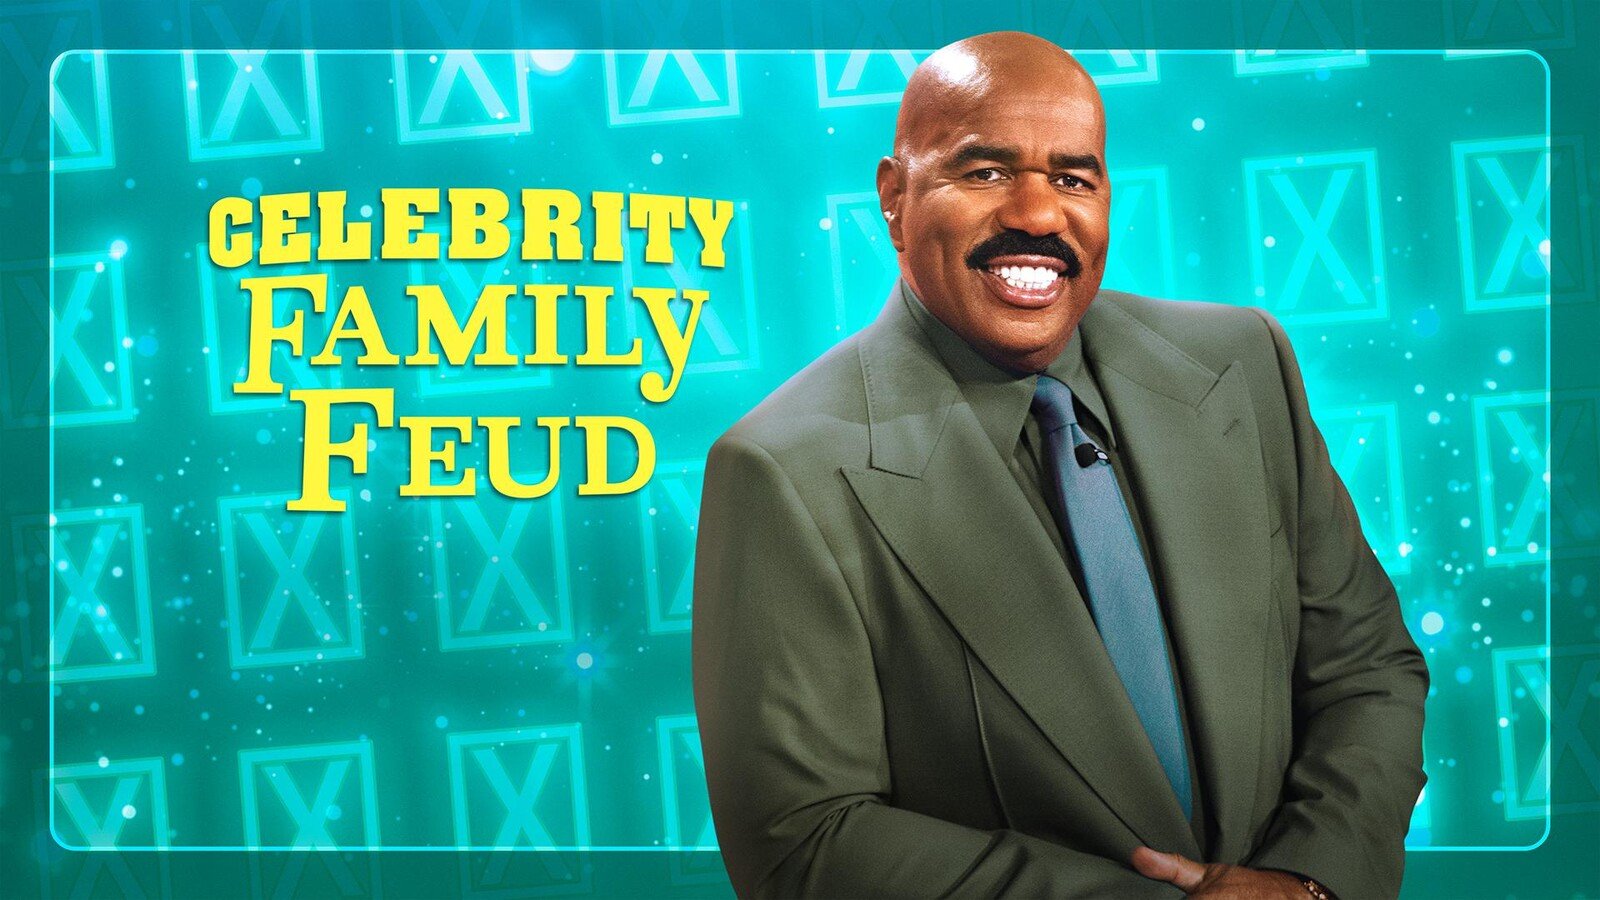 WWE Stars Set To Appear On An Episode Of ‘Celebrity Family Feud’